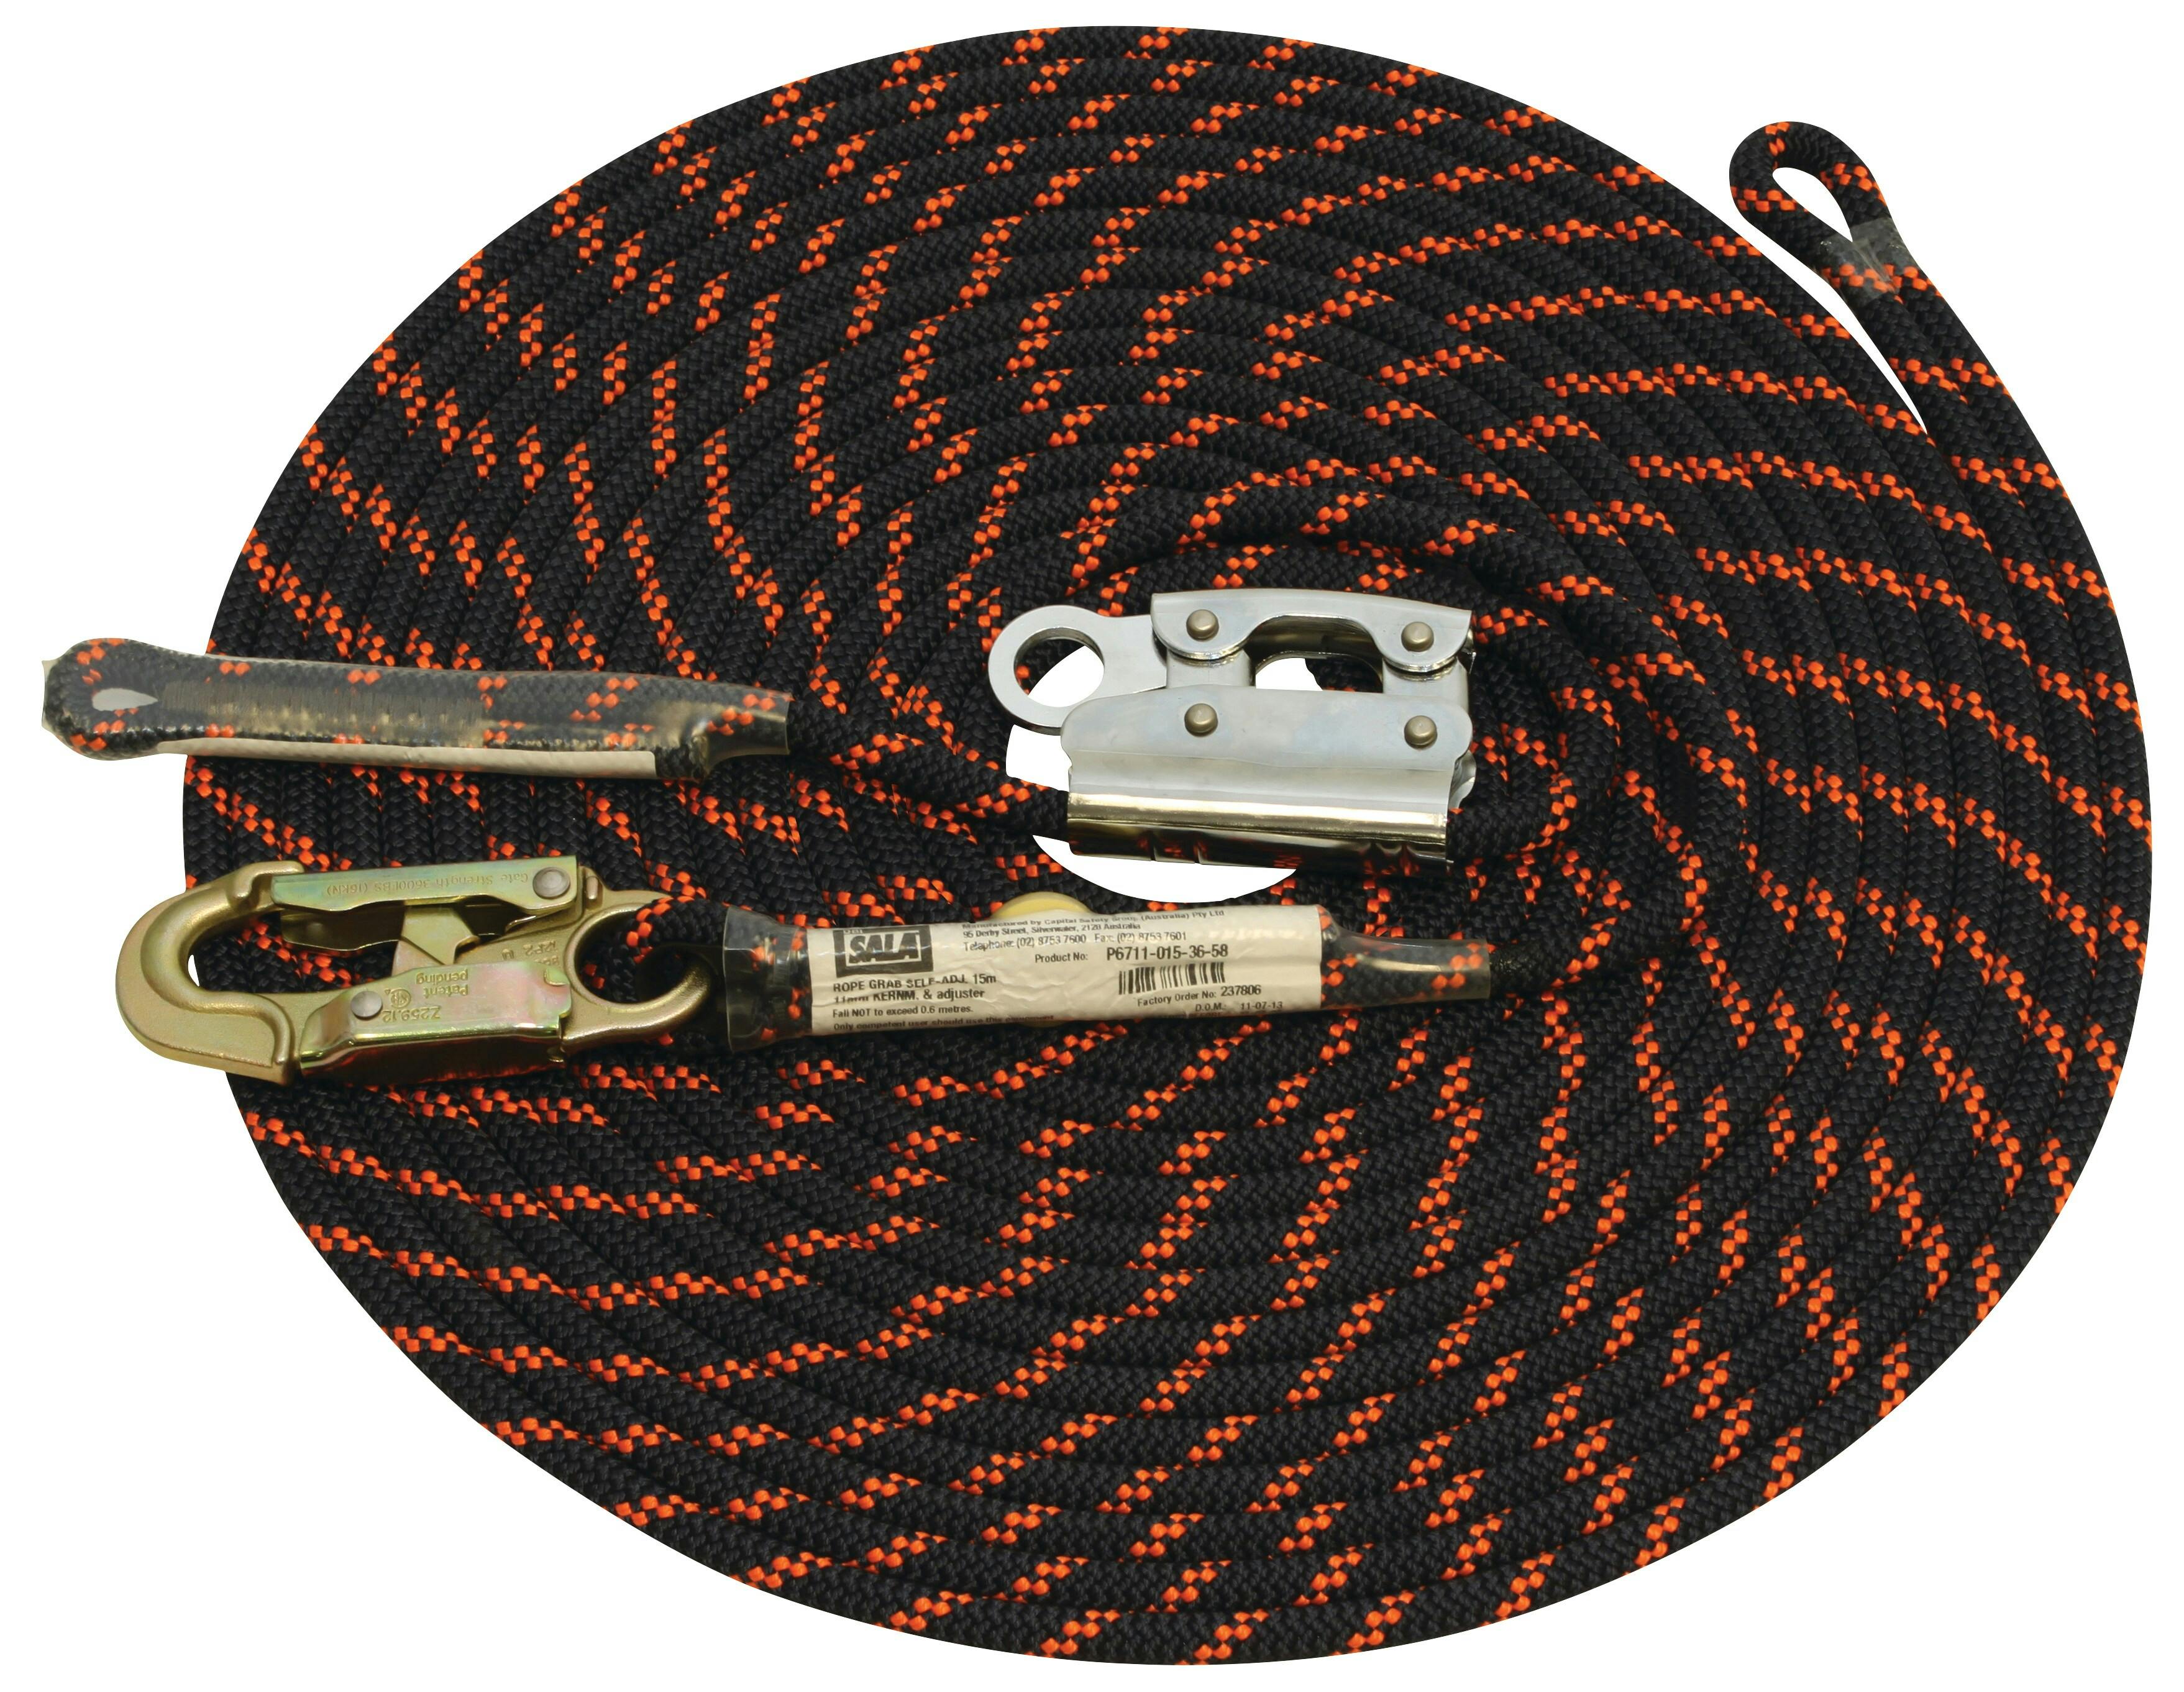 3M™ DBI-SALA® Lifeline Assembly System with integral Rope Grab P6711-015-36-58, 15 m, 1 EA/Case